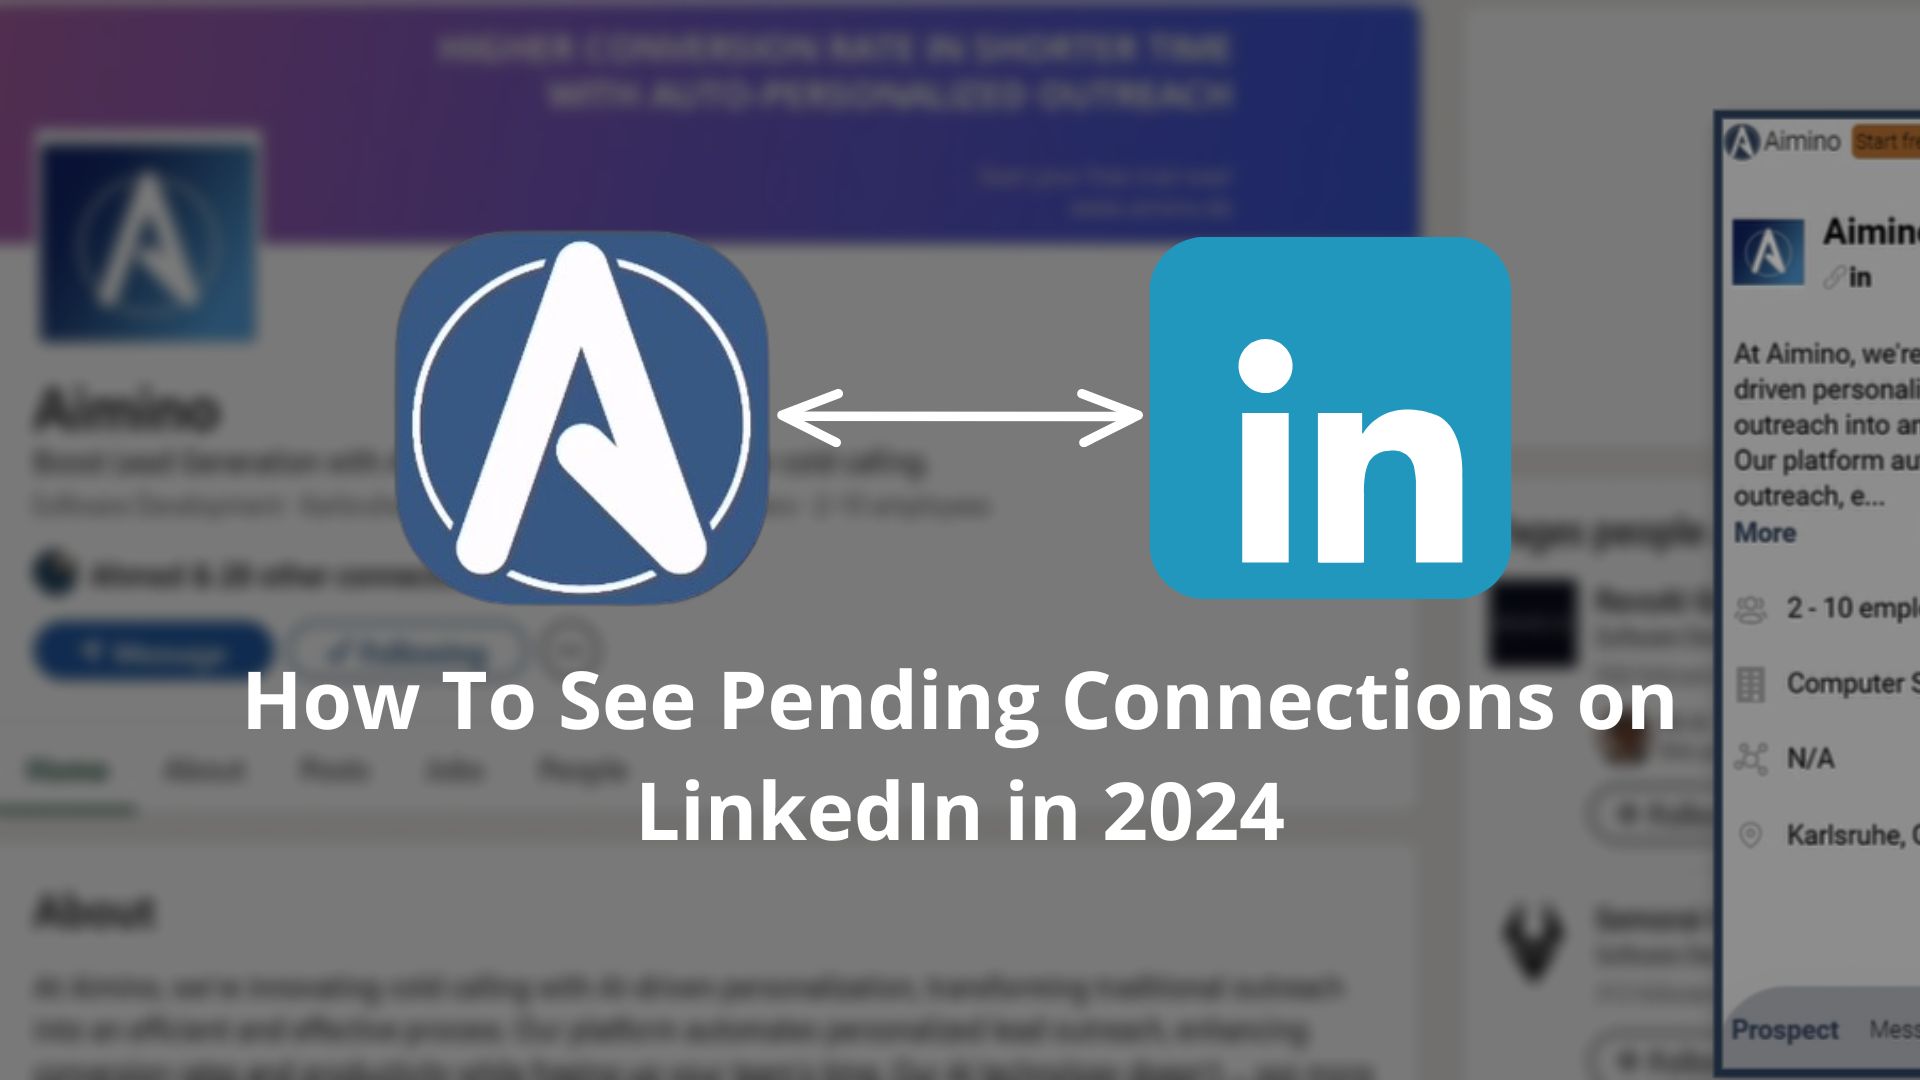 How To See Pending Connections on LinkedIn in 2024